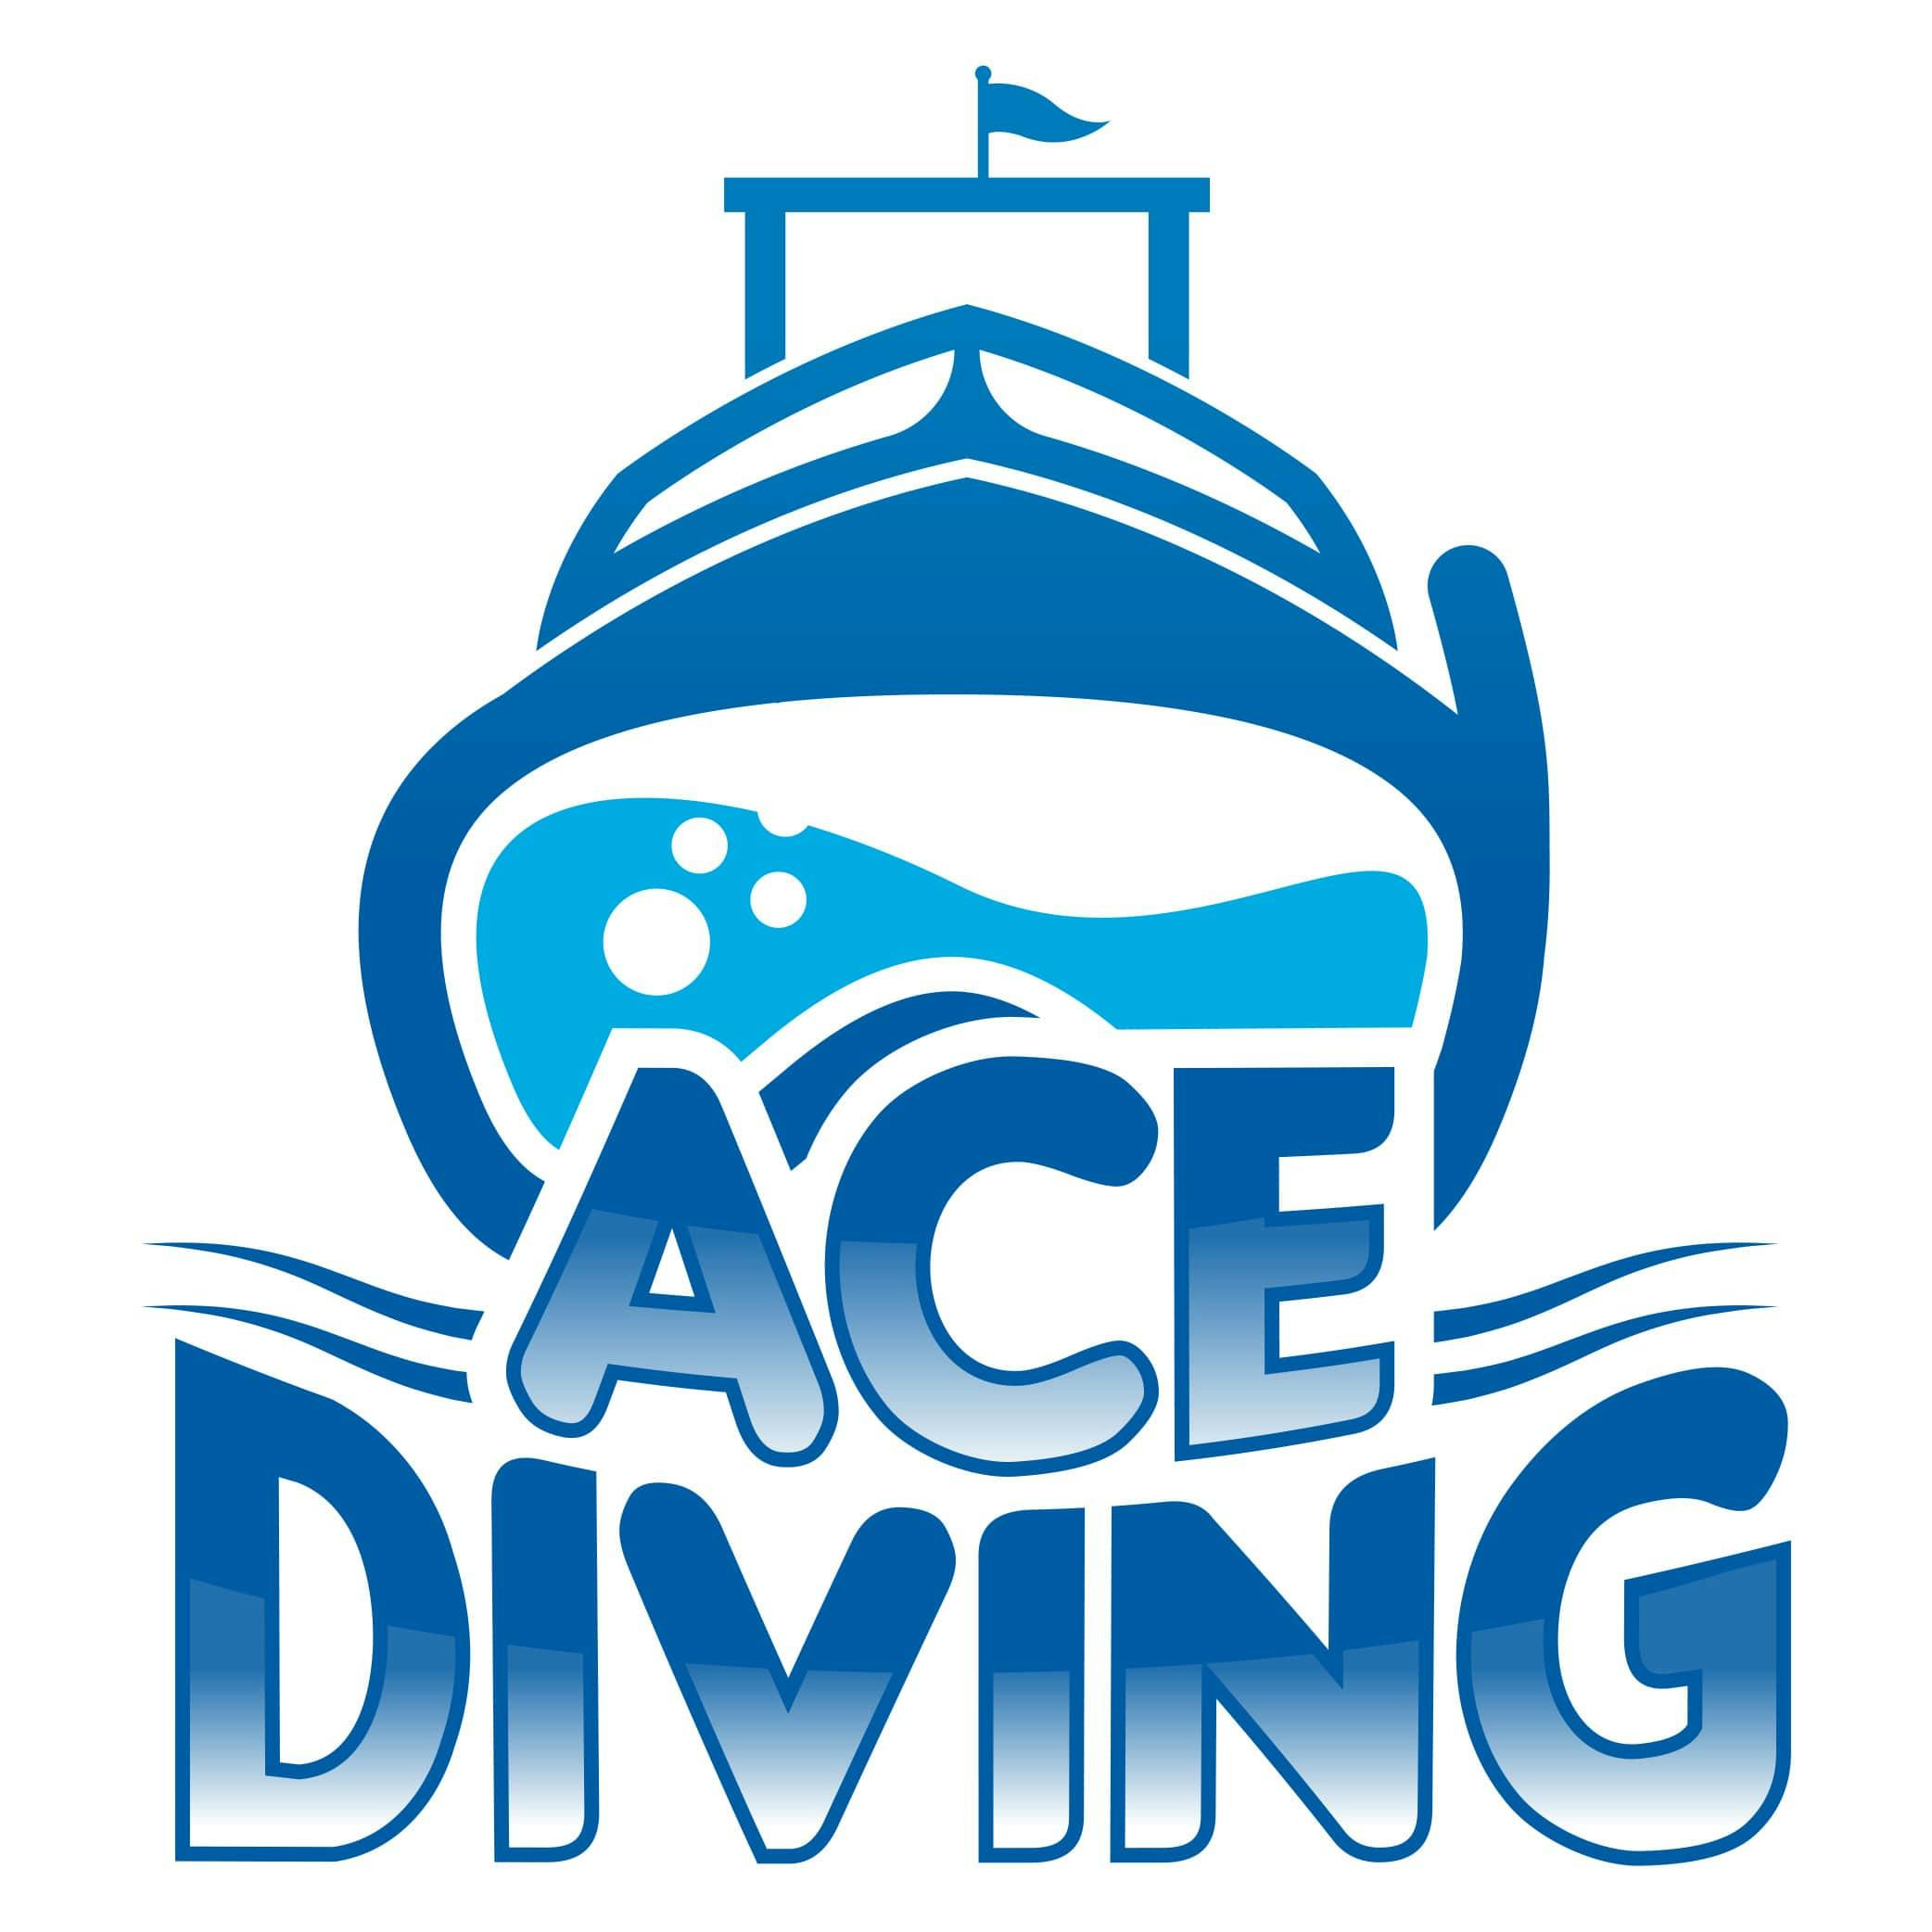 ACE DIVING